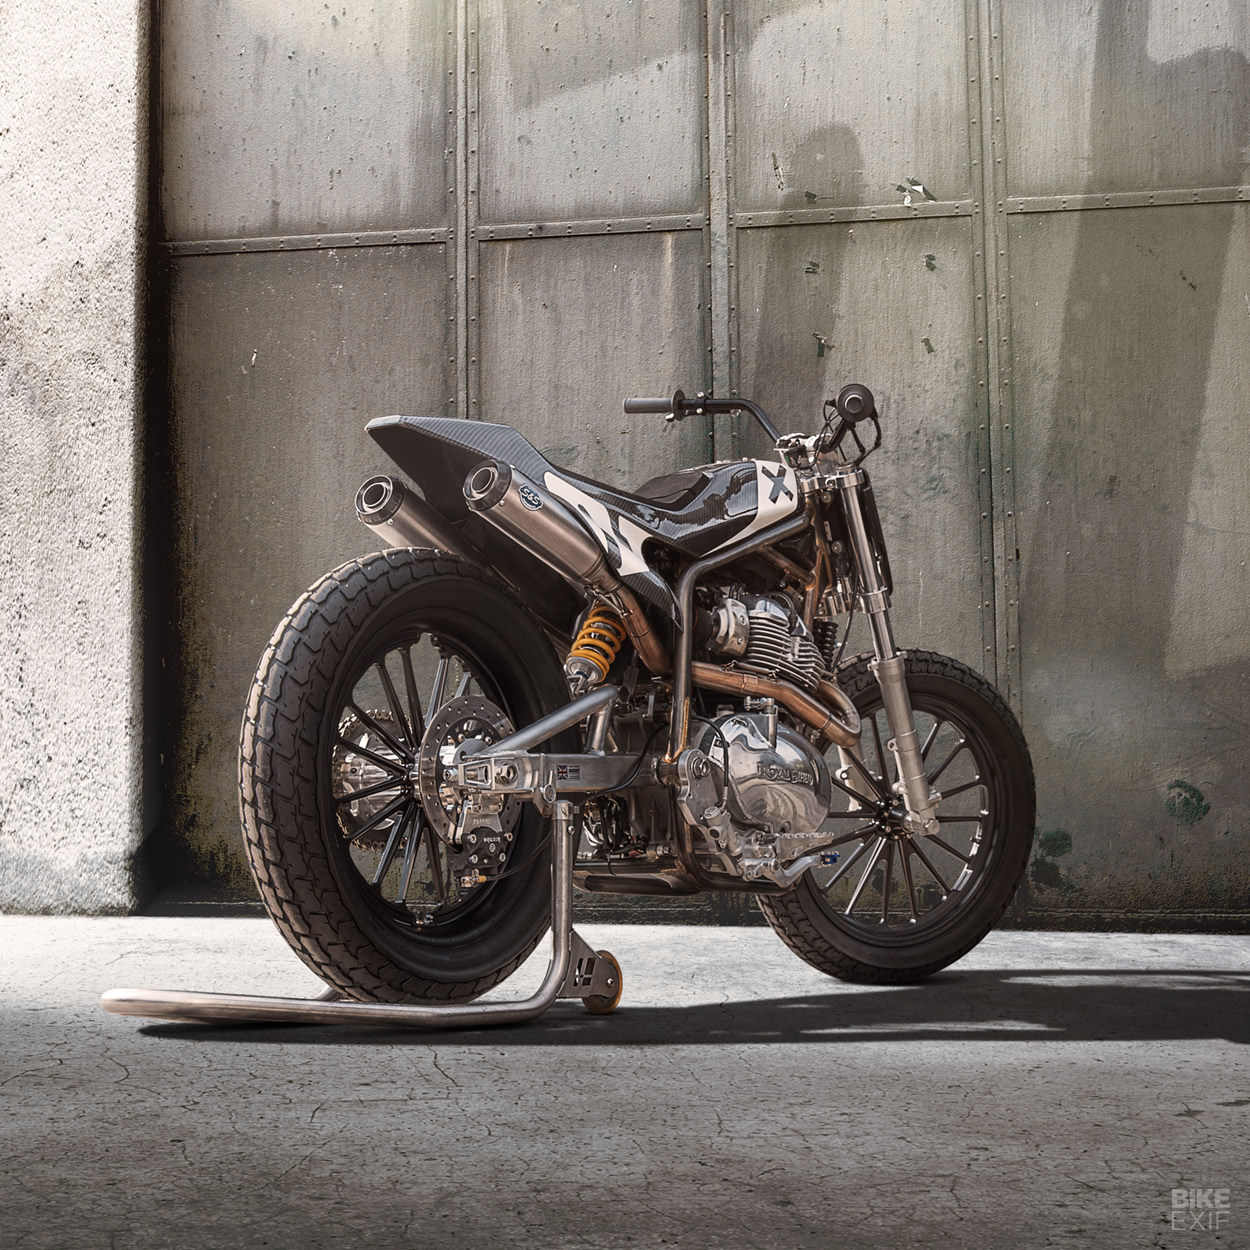 A Royal Enfield flat tracker from Harris Performance